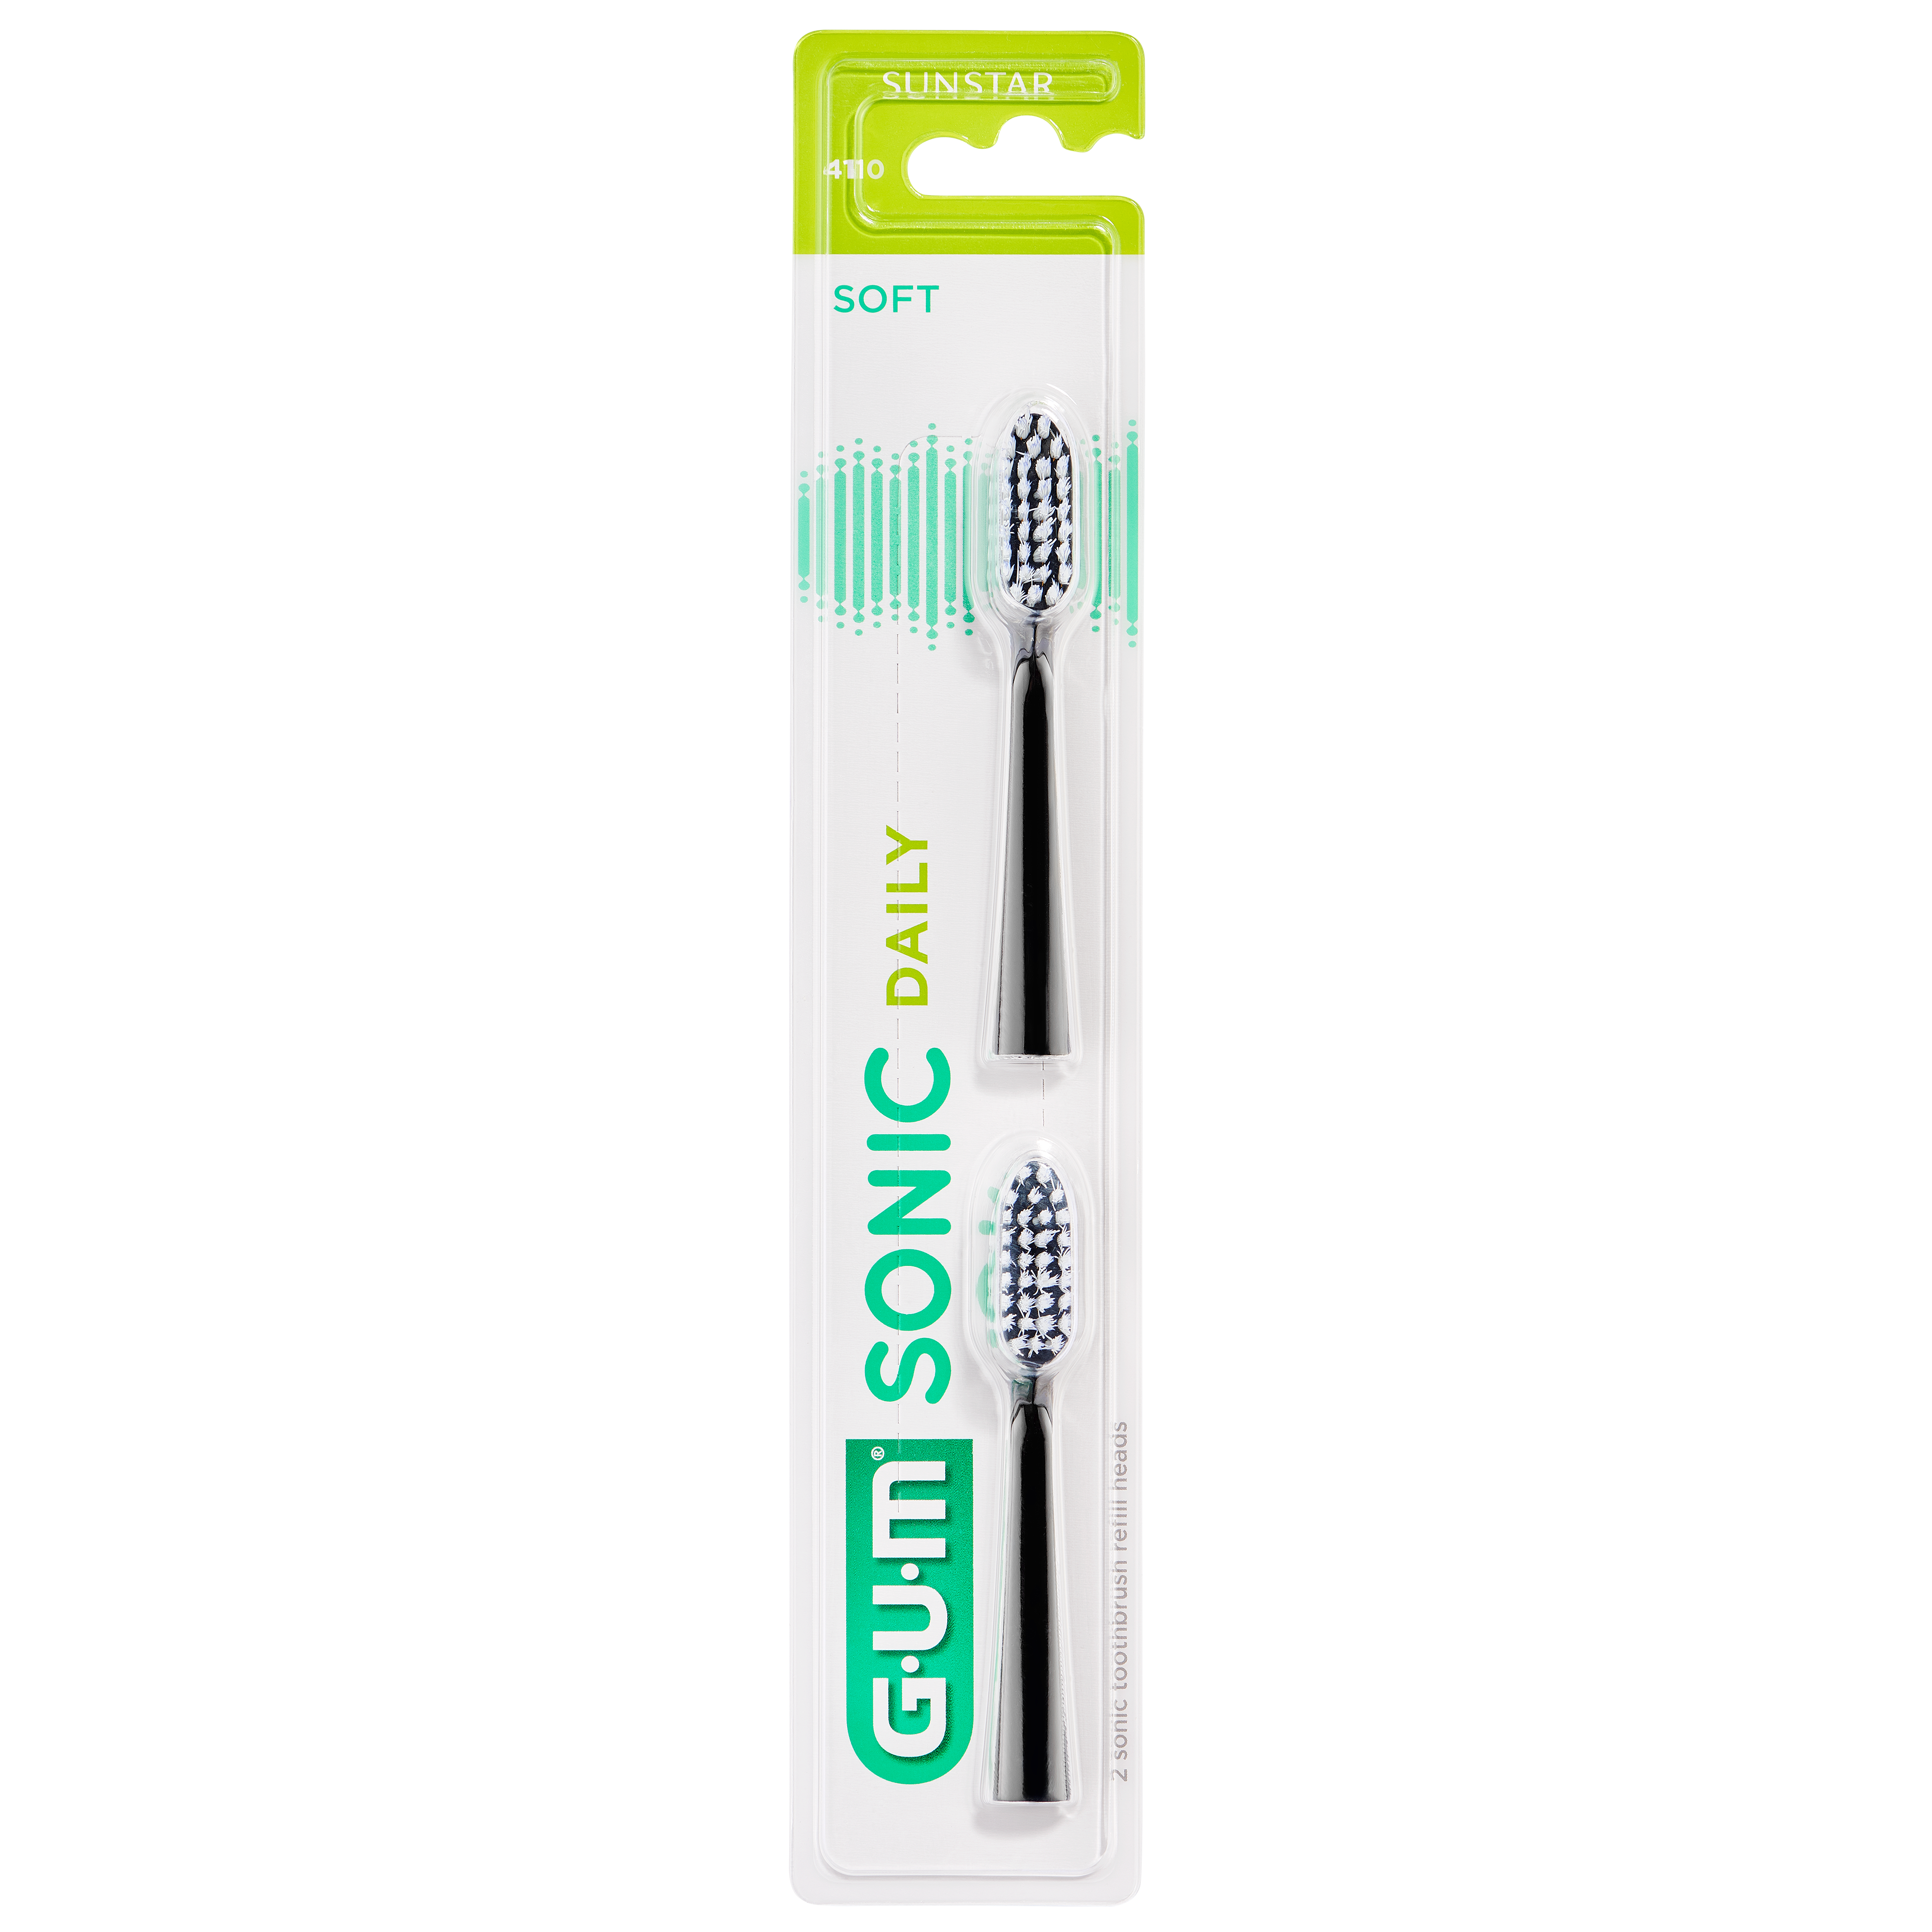 P4110-GUM-SONIC-DAILY-black-refill-blister-front-4000x4000.png